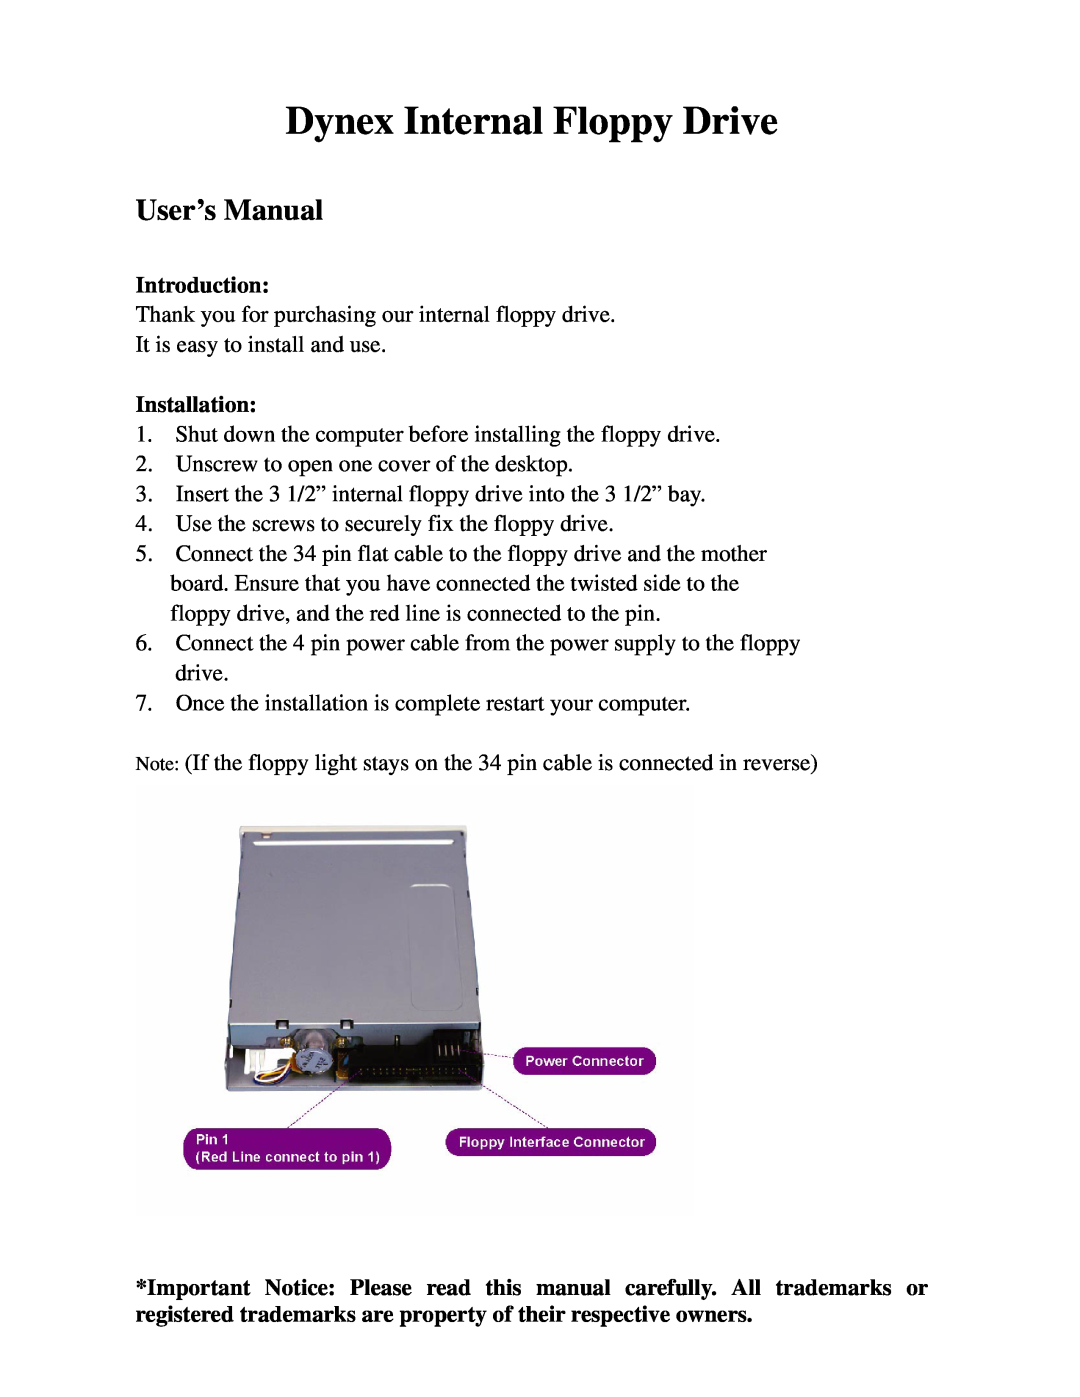 Dynex DX-IF101 user manual Dynex Internal Floppy Drive, User’s Manual, Introduction, Installation 